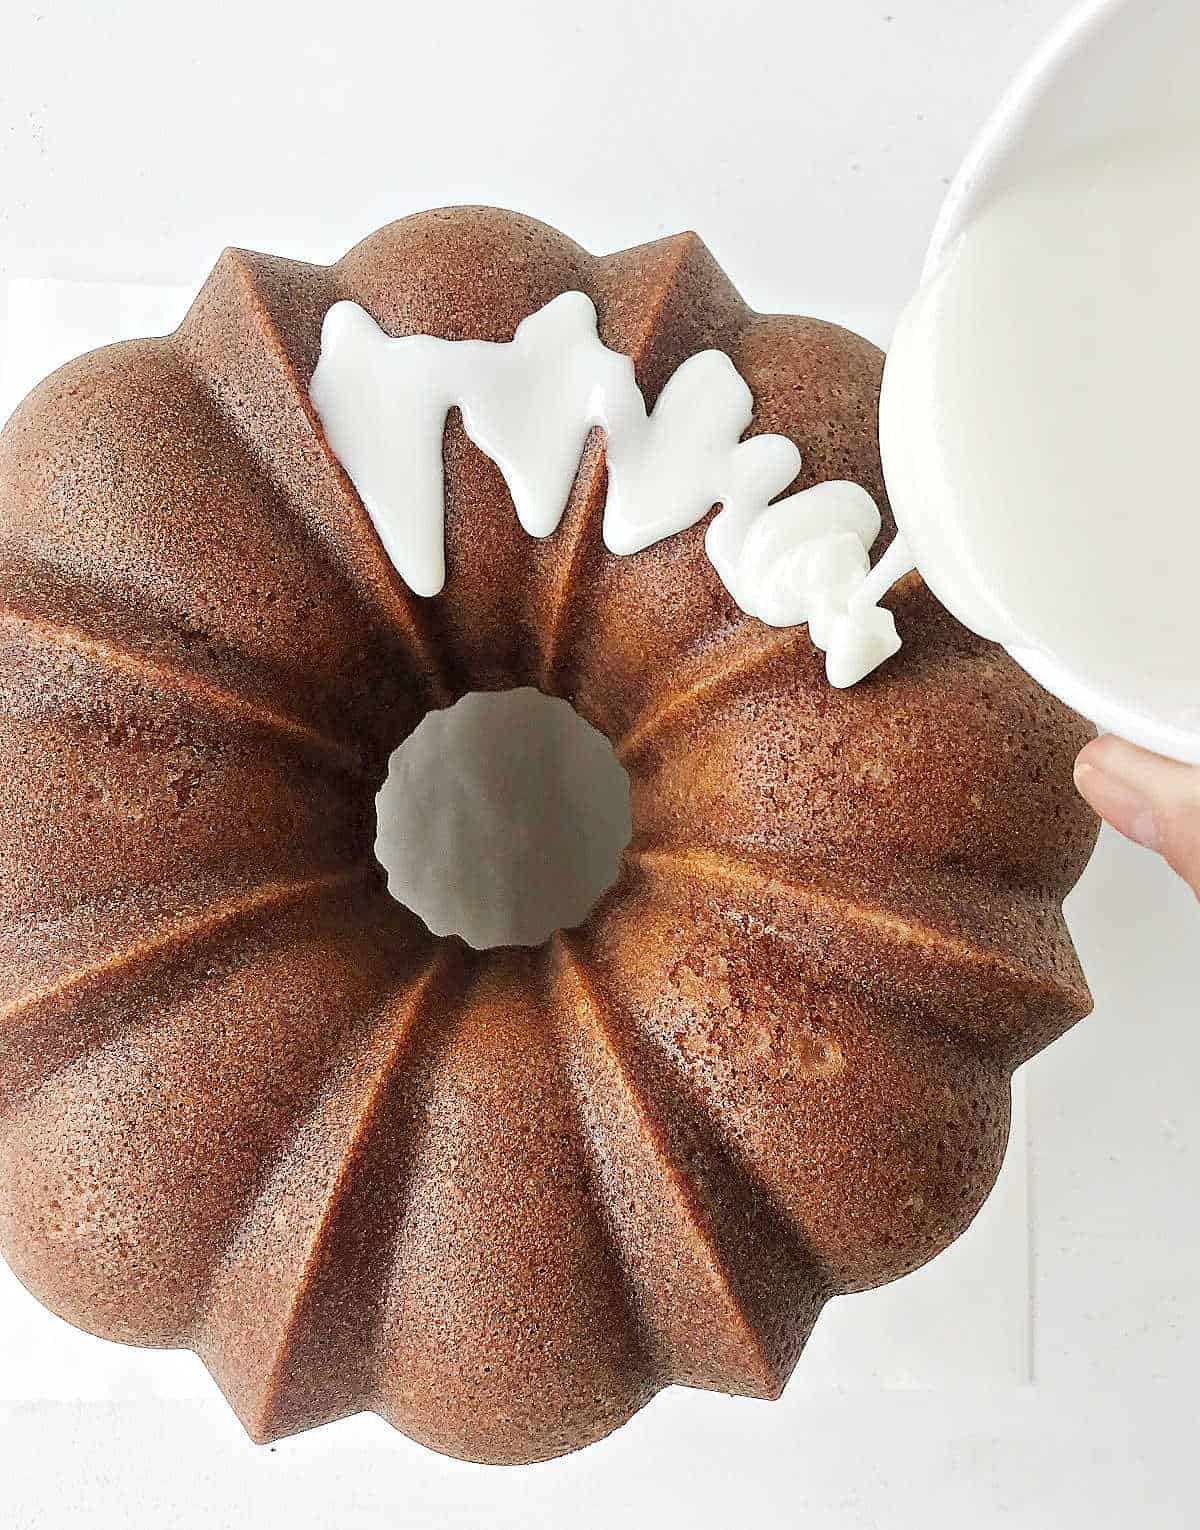 Pouring glaze over bundt cake. Top view. White surface.